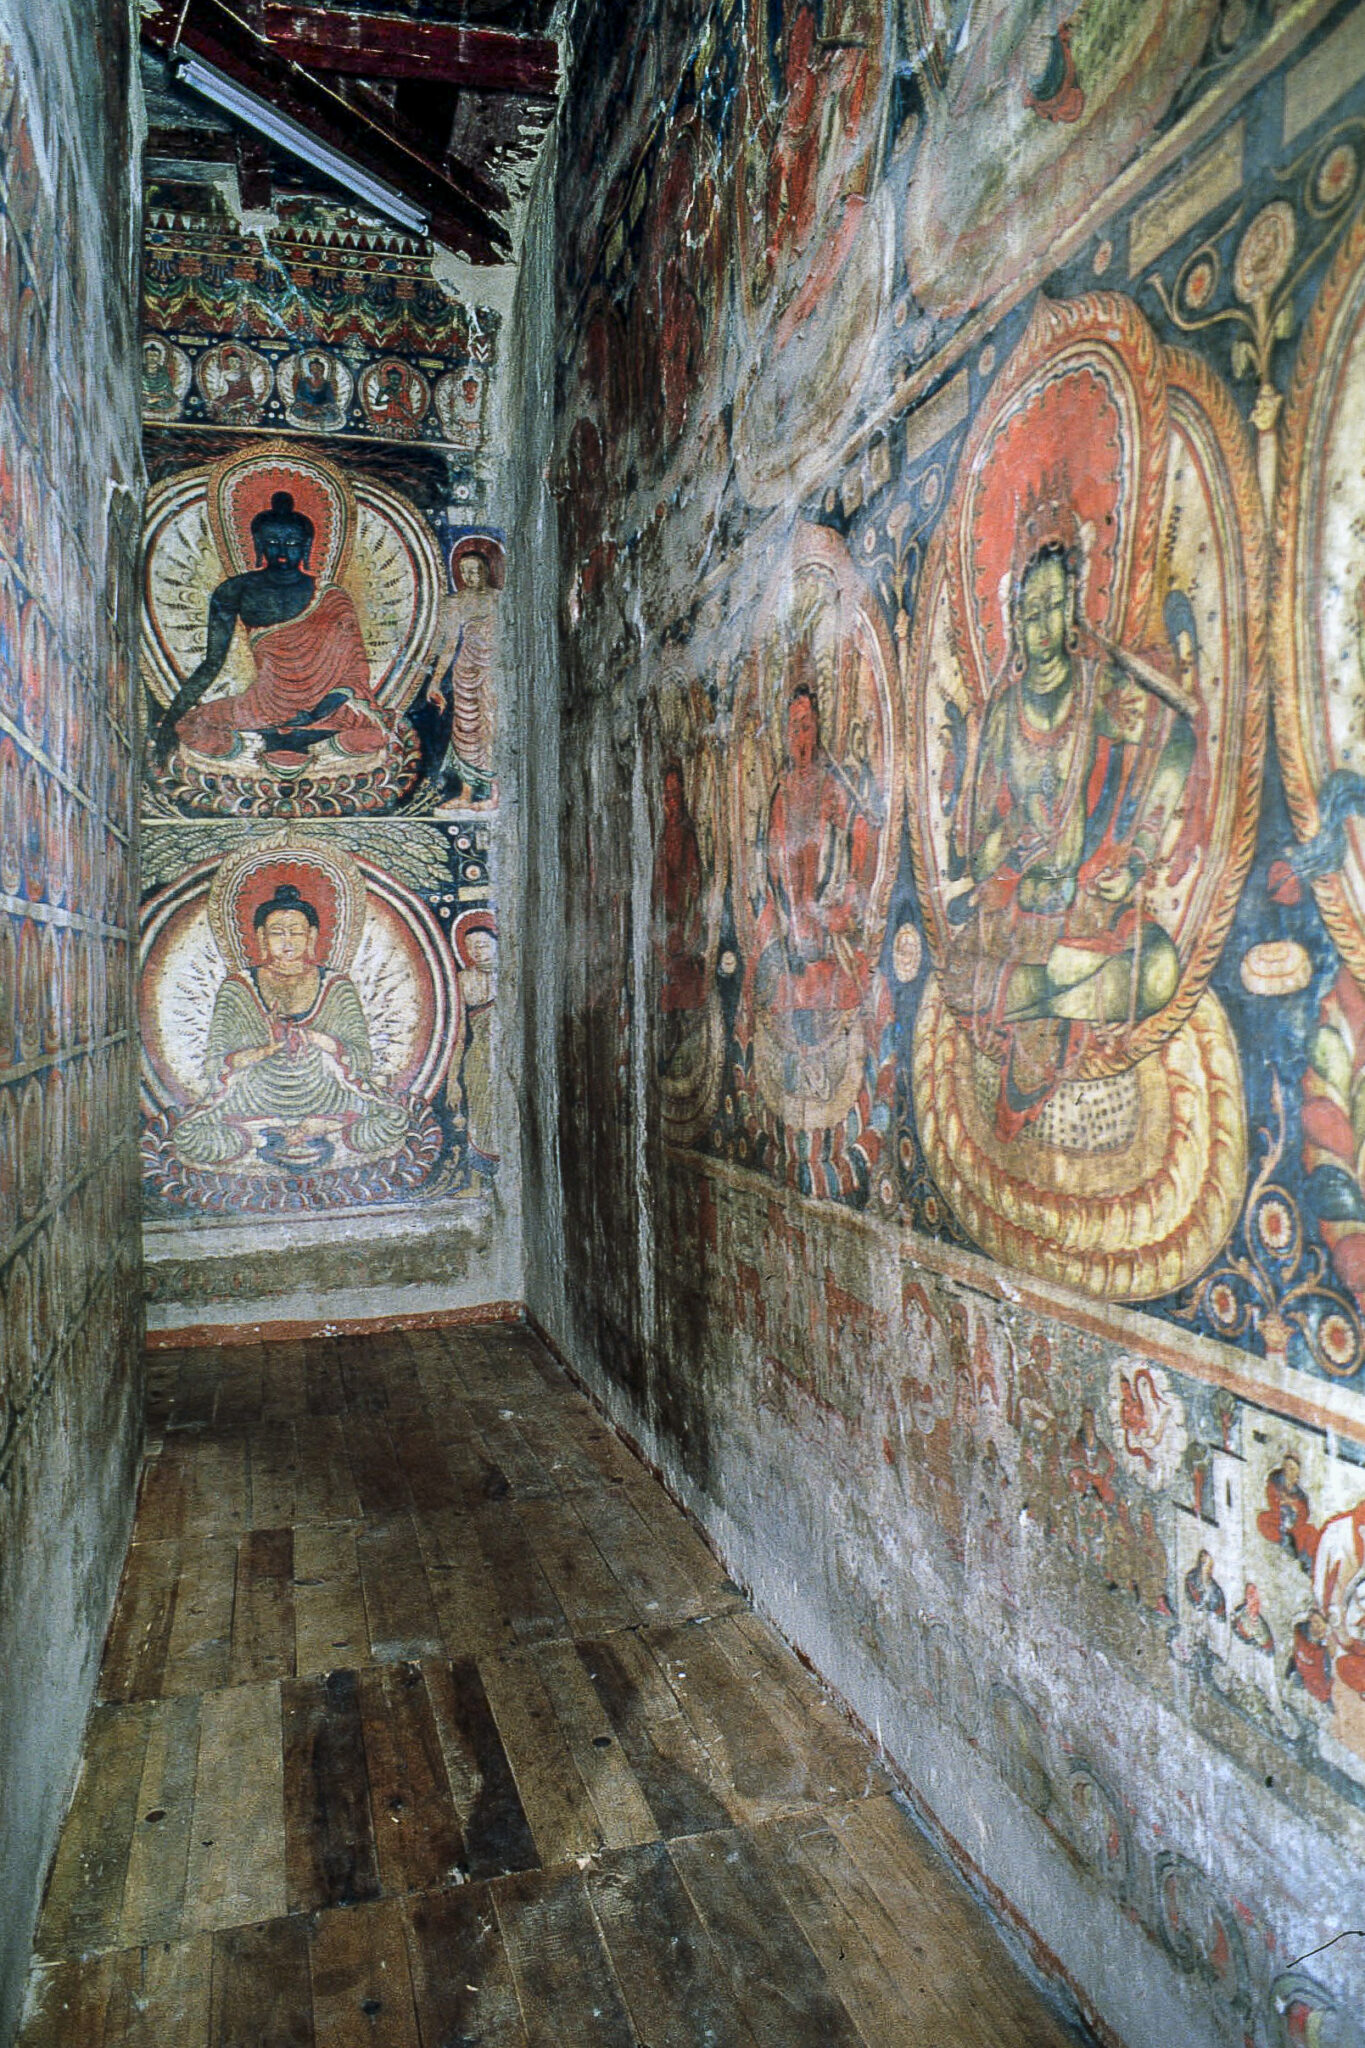 Corridor-like structure with walls entirely covered in murals arranged in registers and depicting deities